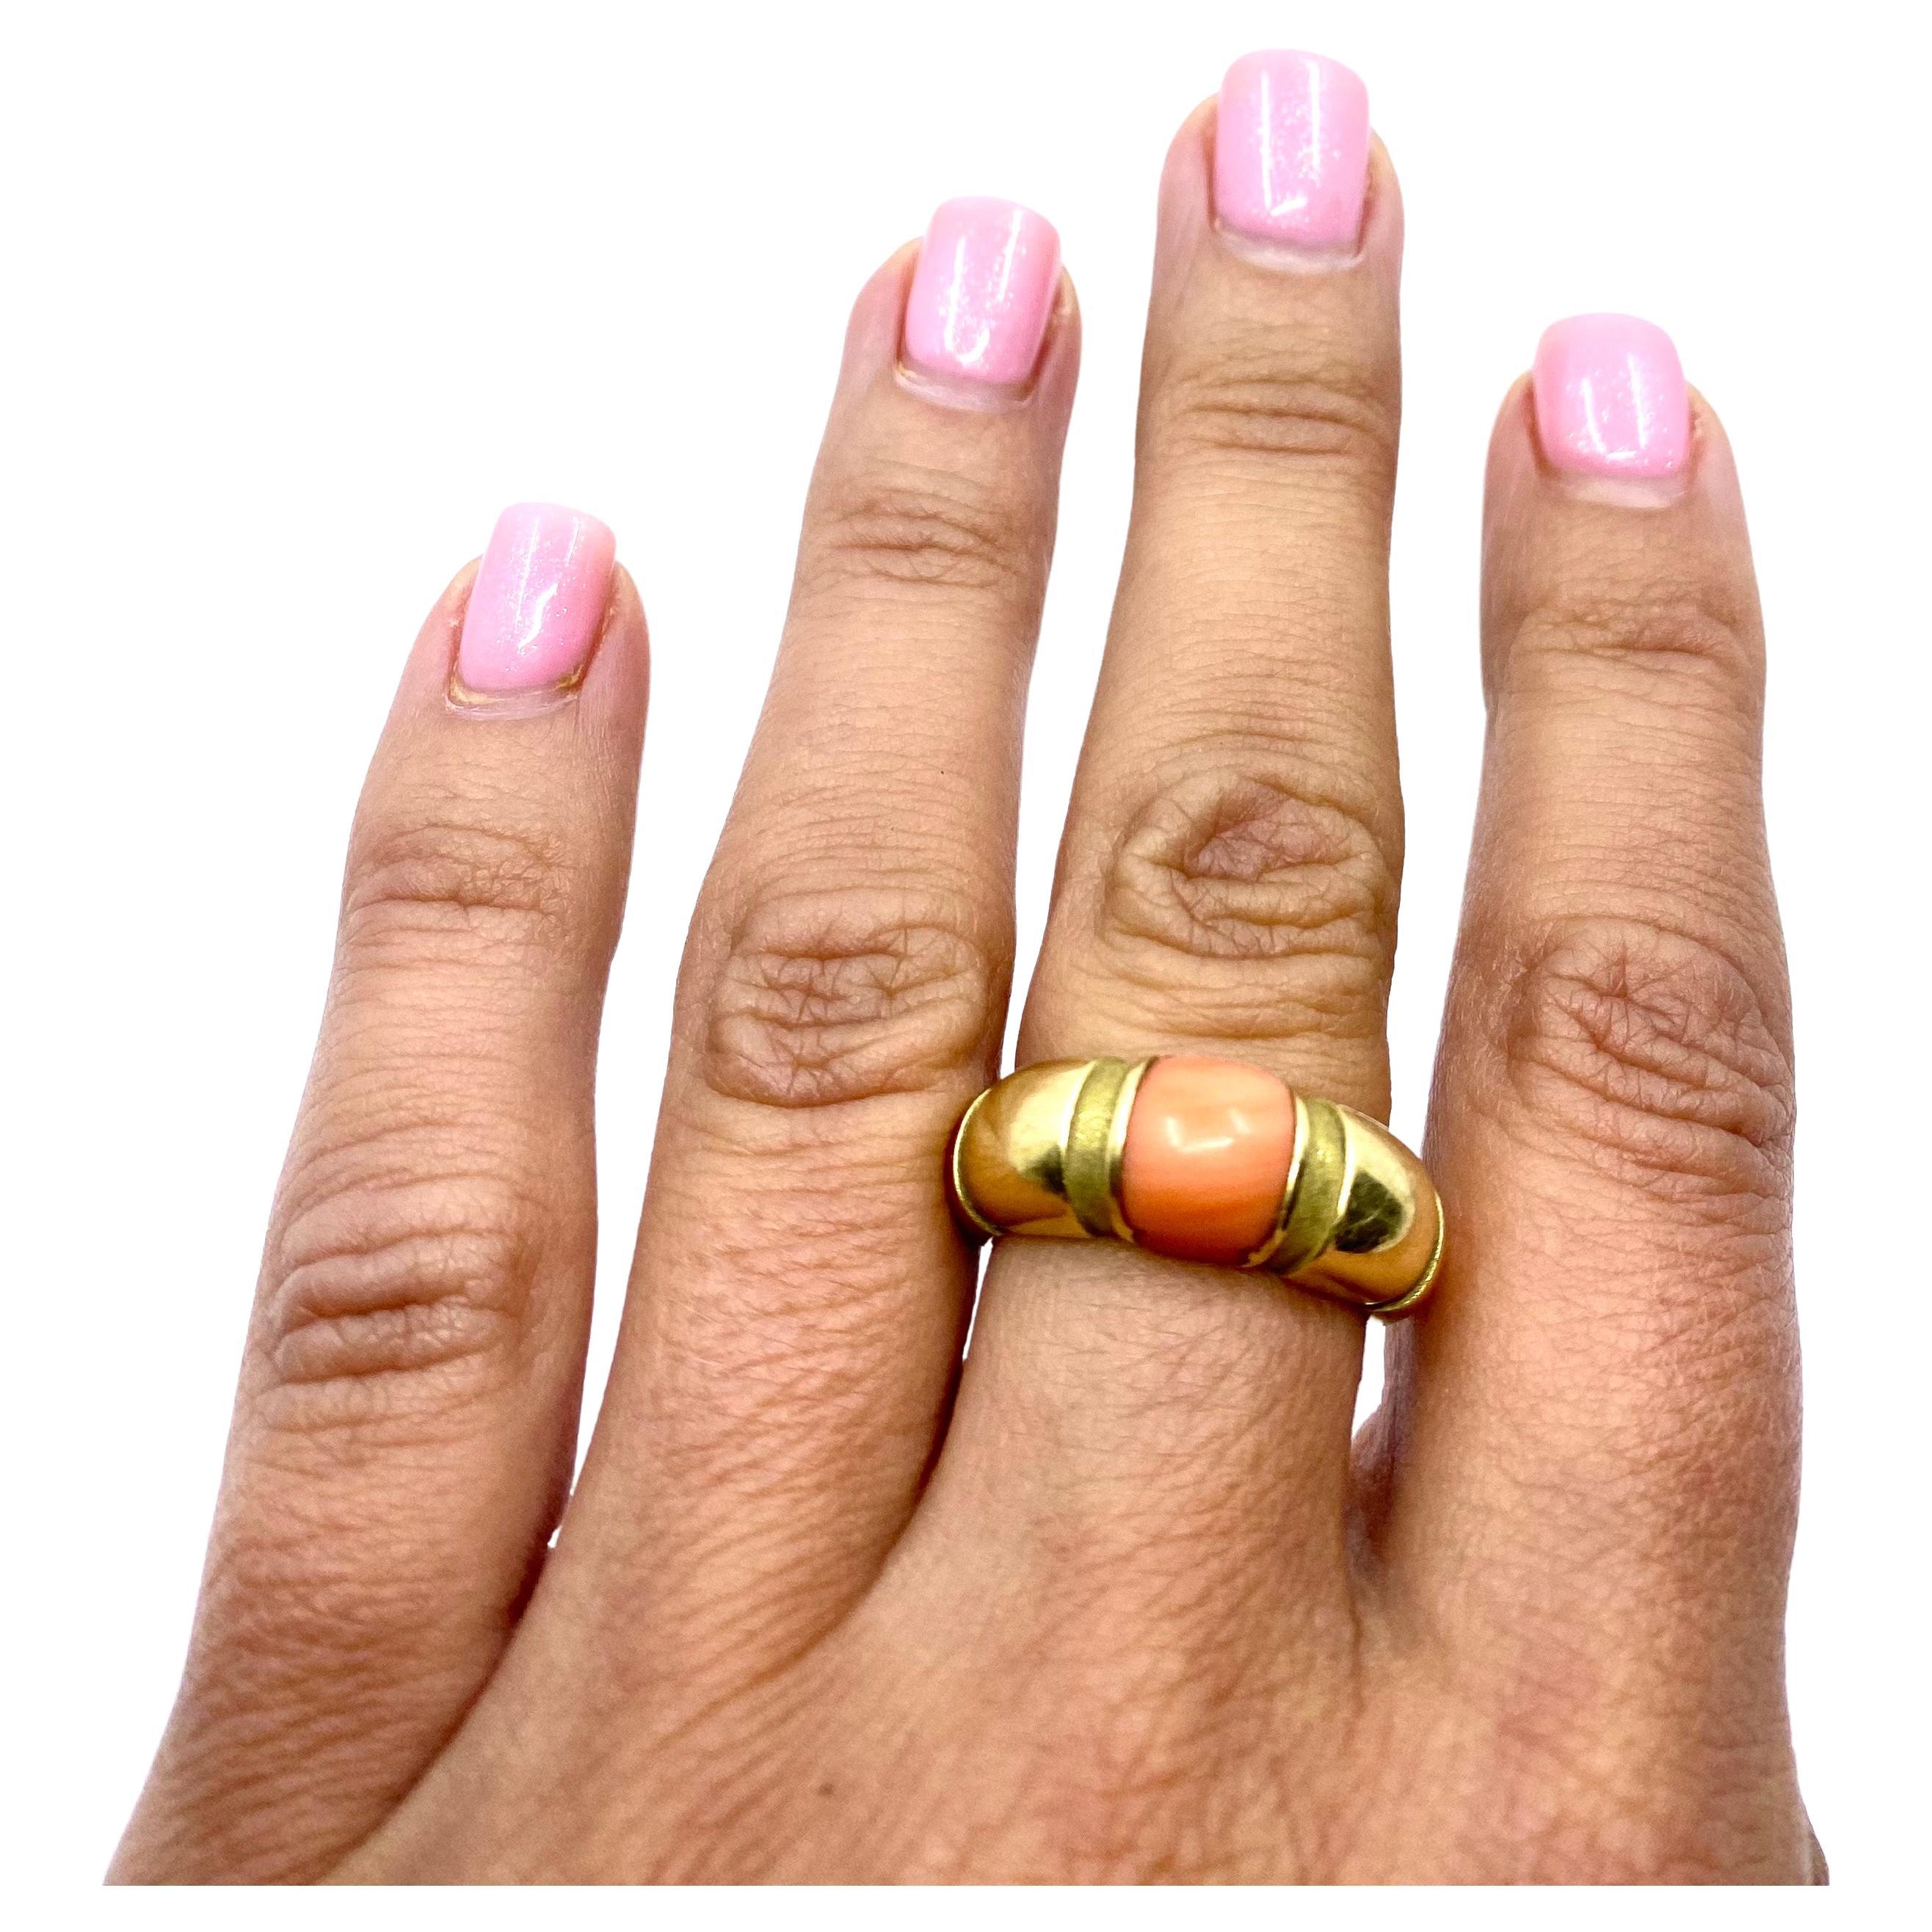 A vintage coral ring by Mauboussin made in 18k gold.
This architectural ring with the cabochon cut coral designed with six vertical   grooves in the band. These grooves are textured, and the band is polished gold. These elements, along with the